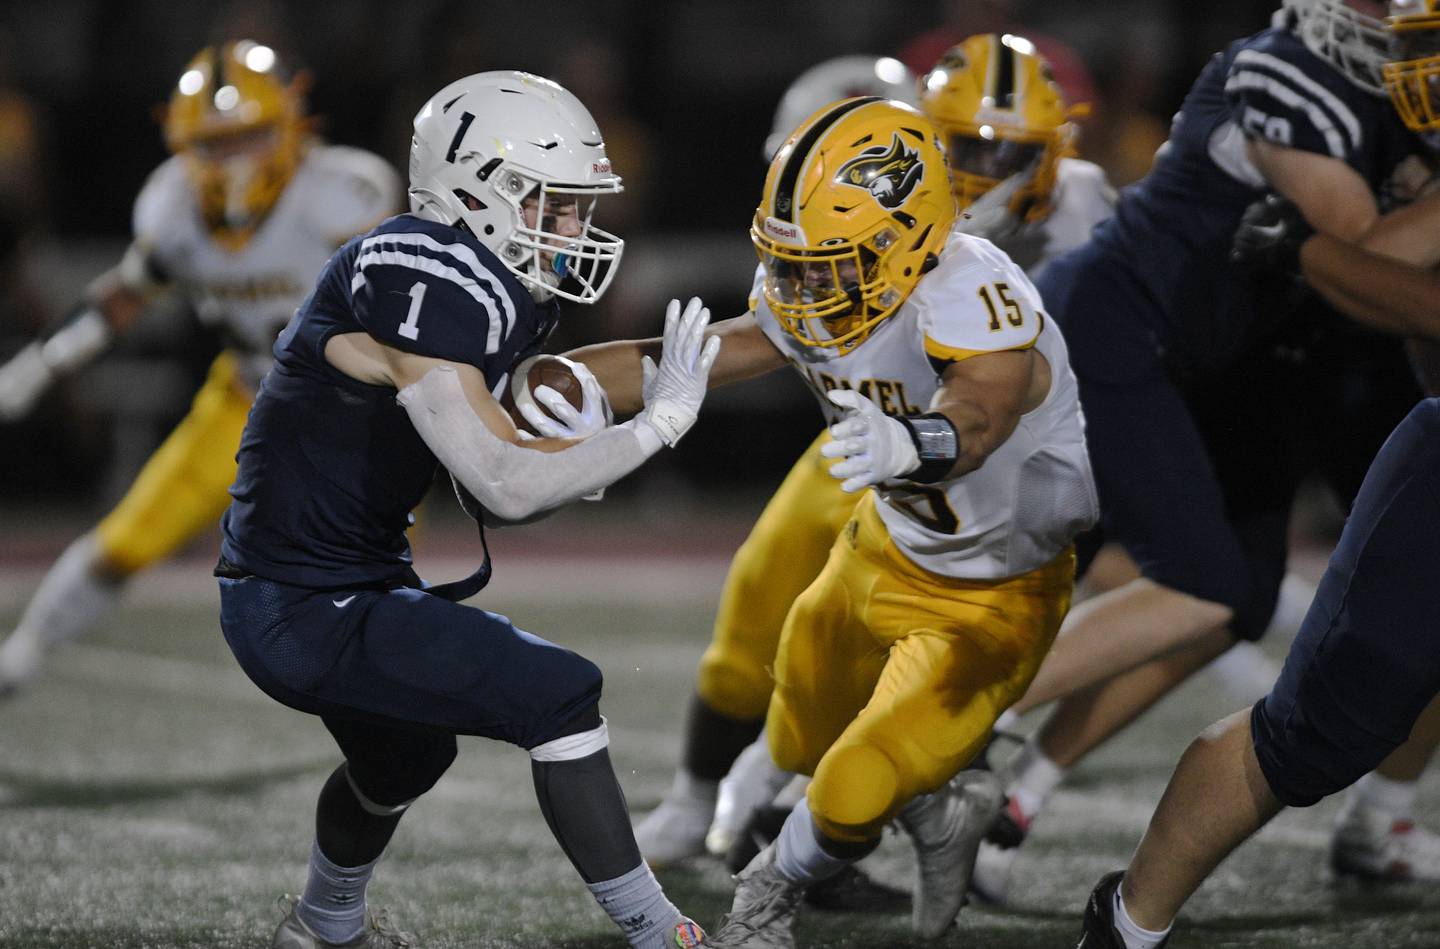 St. Viator’s Jake VanBooven tries to get past Carmel’s Kyle Lynch in a football game in Arlington Heights on Friday, September 16, 2022.